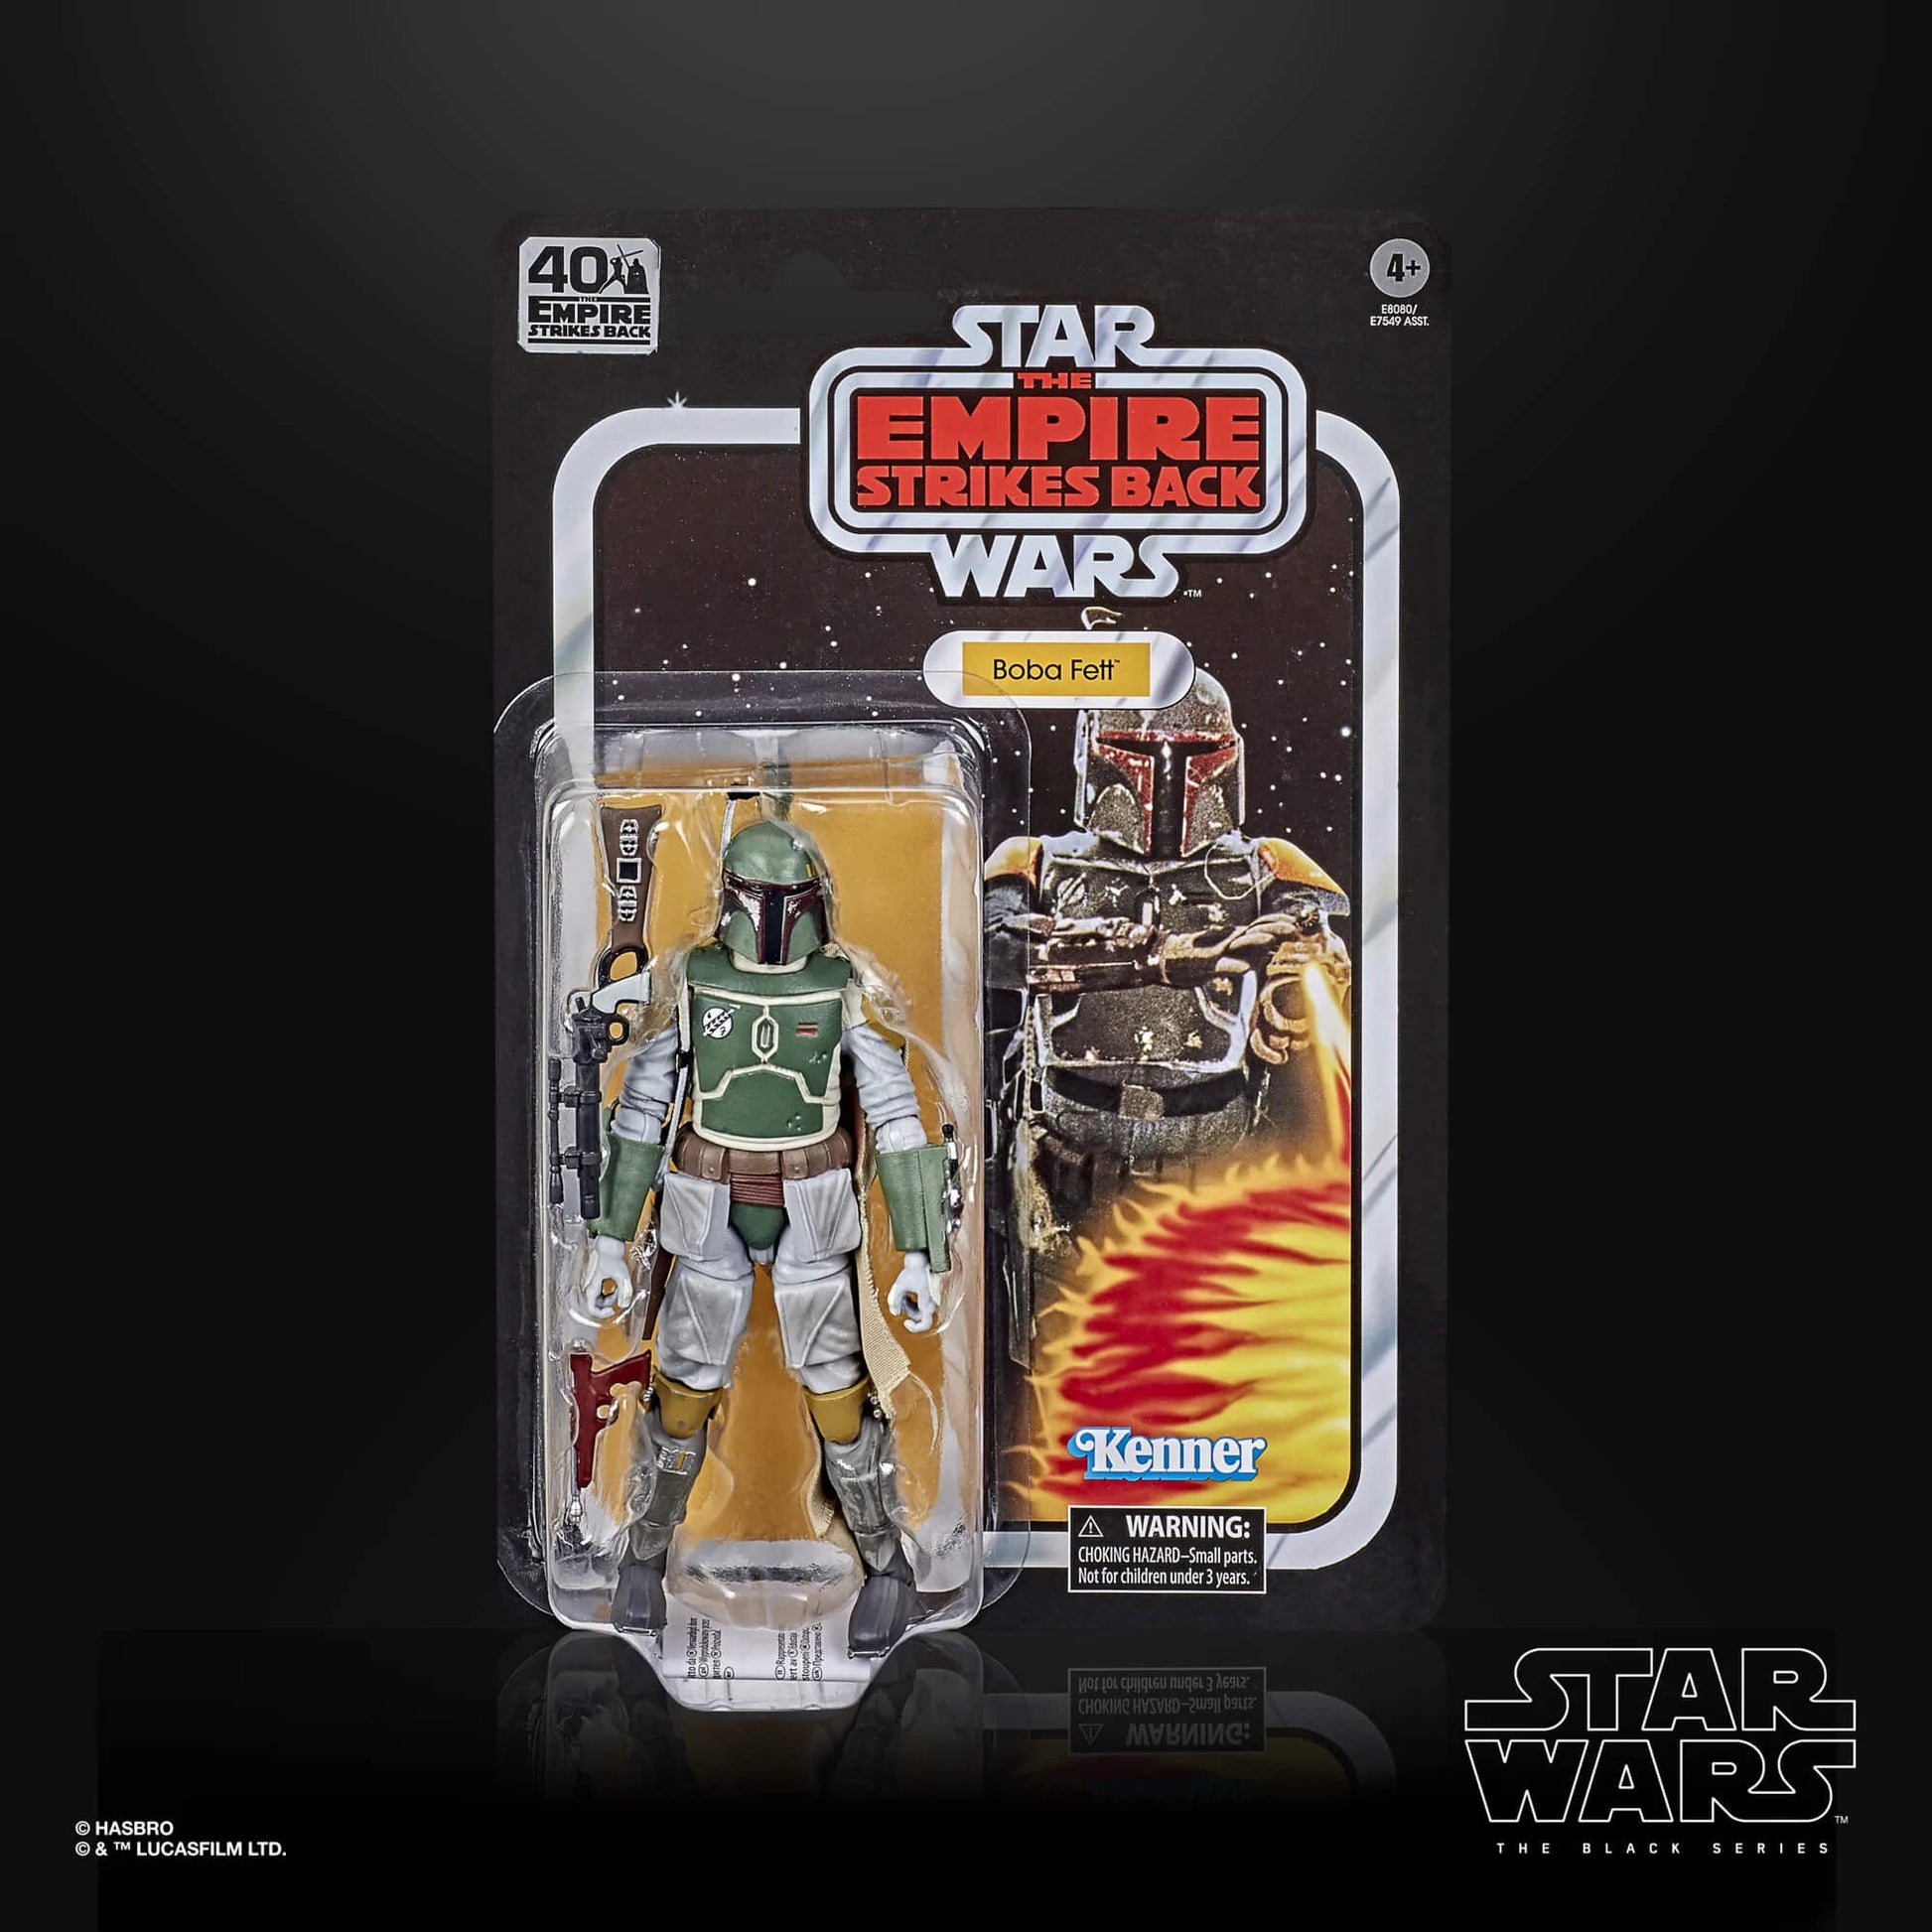 Star Wars The Black Seres 40th Anniversary Boba Fett Empire Strikes Back 6-inch action figure on Kenner retro card